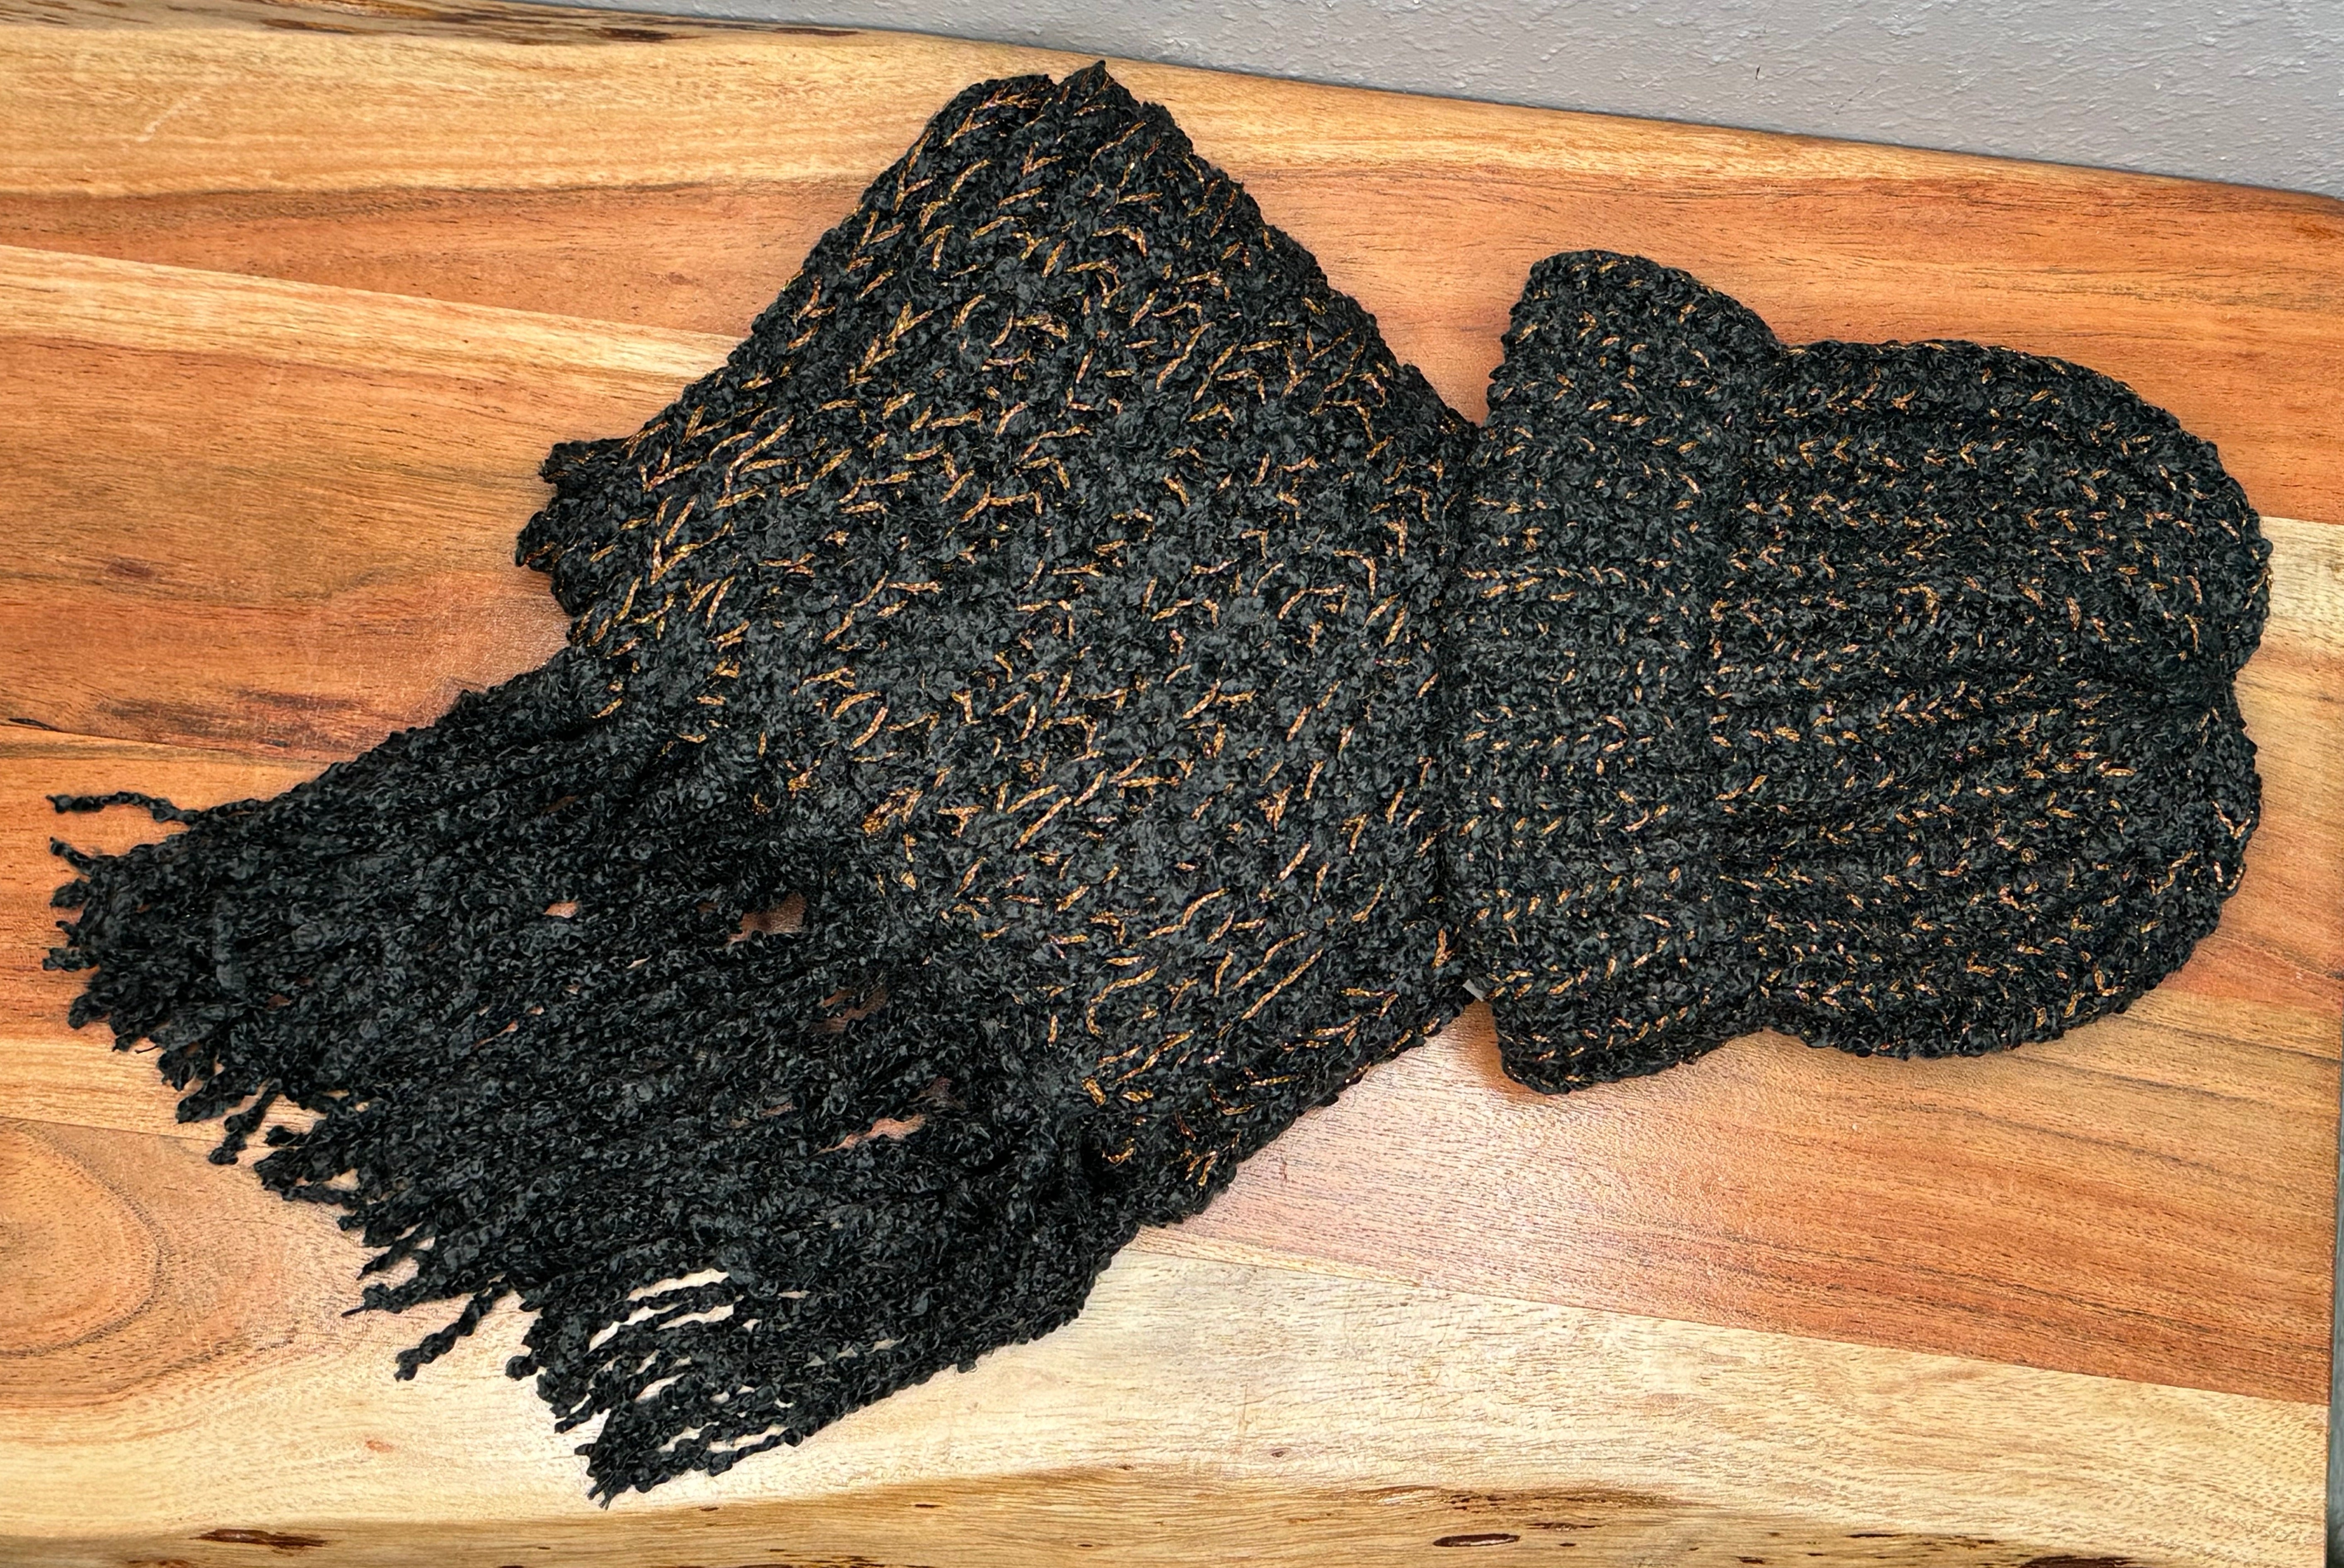 Black Scarf and Hat Set